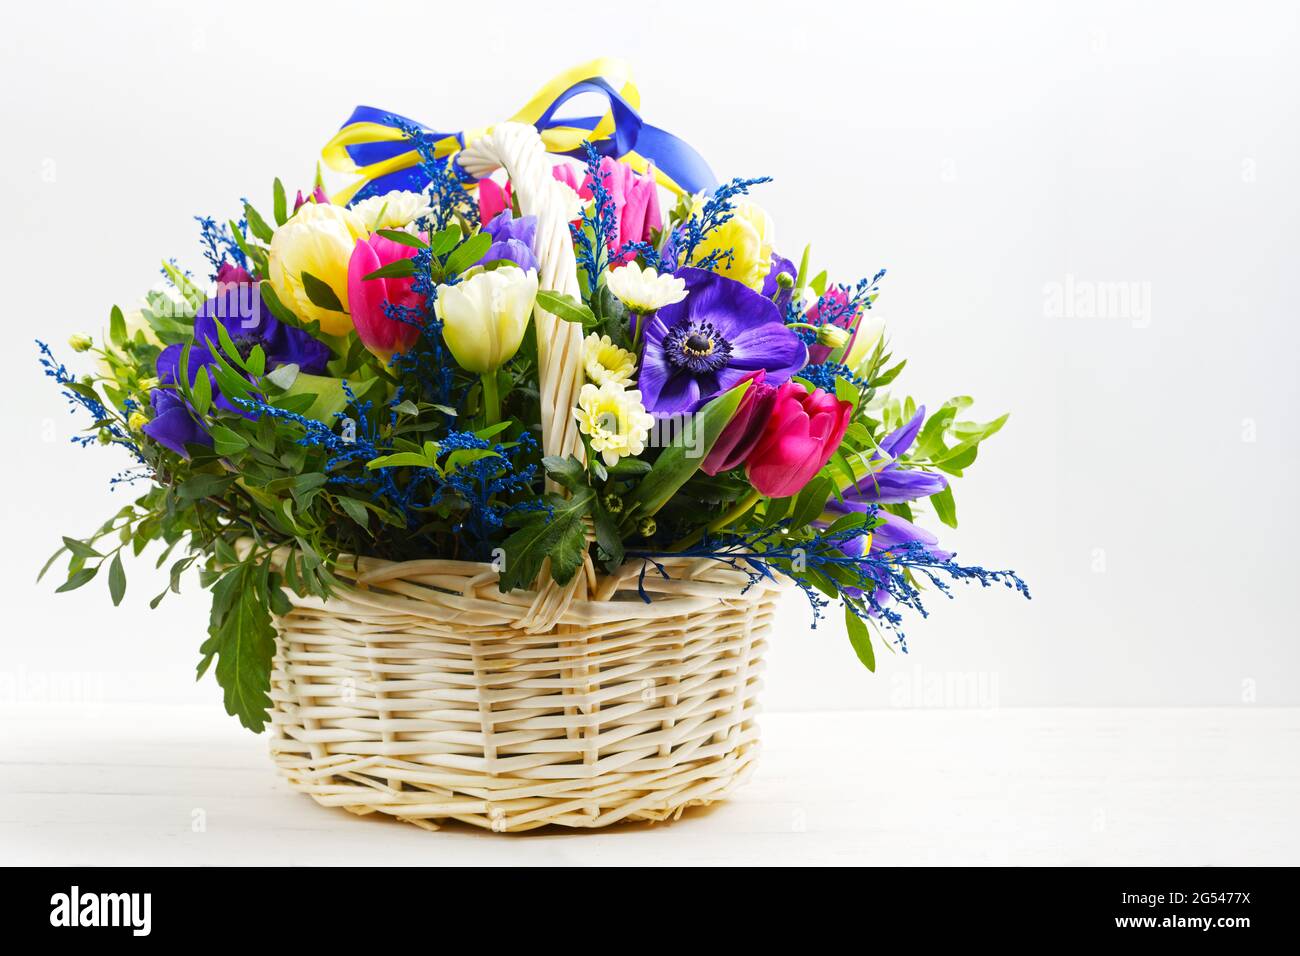 Bouquet of flowers in a wicker basket on white wooden table Stock Photo